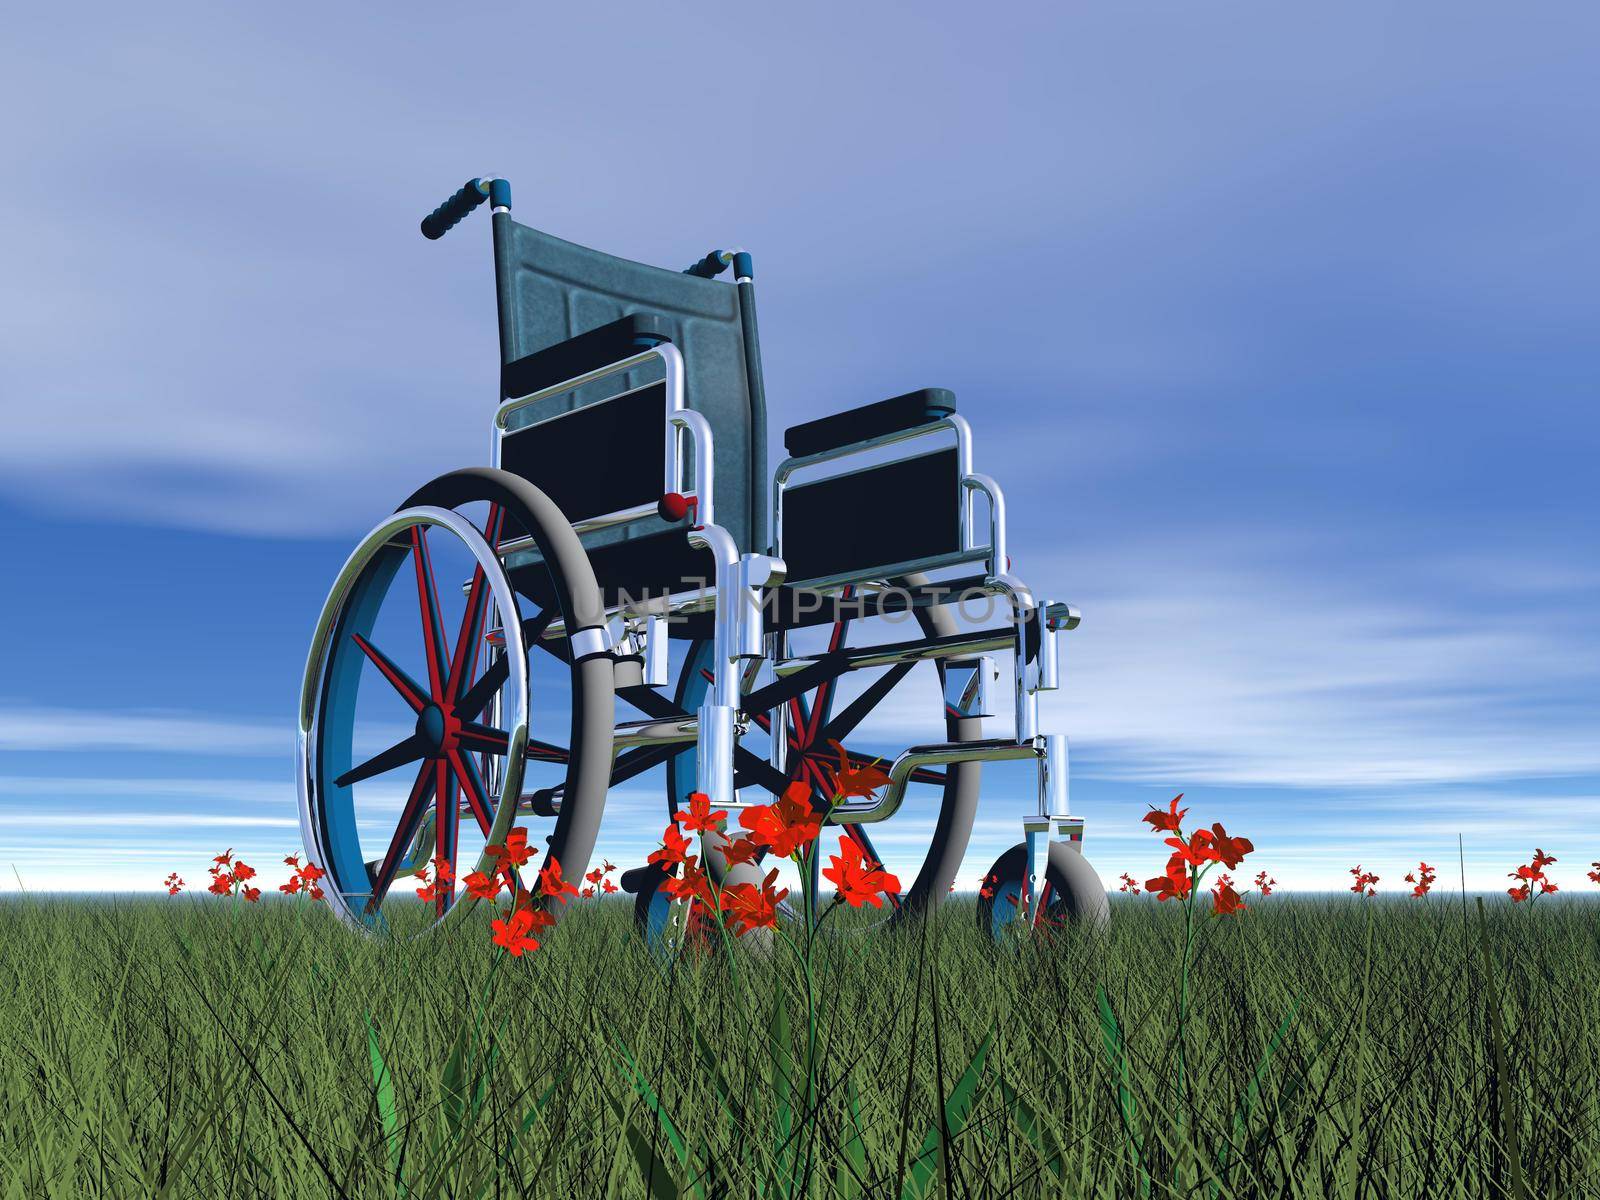 One wheelchair standing in the grass full of red flowers by day